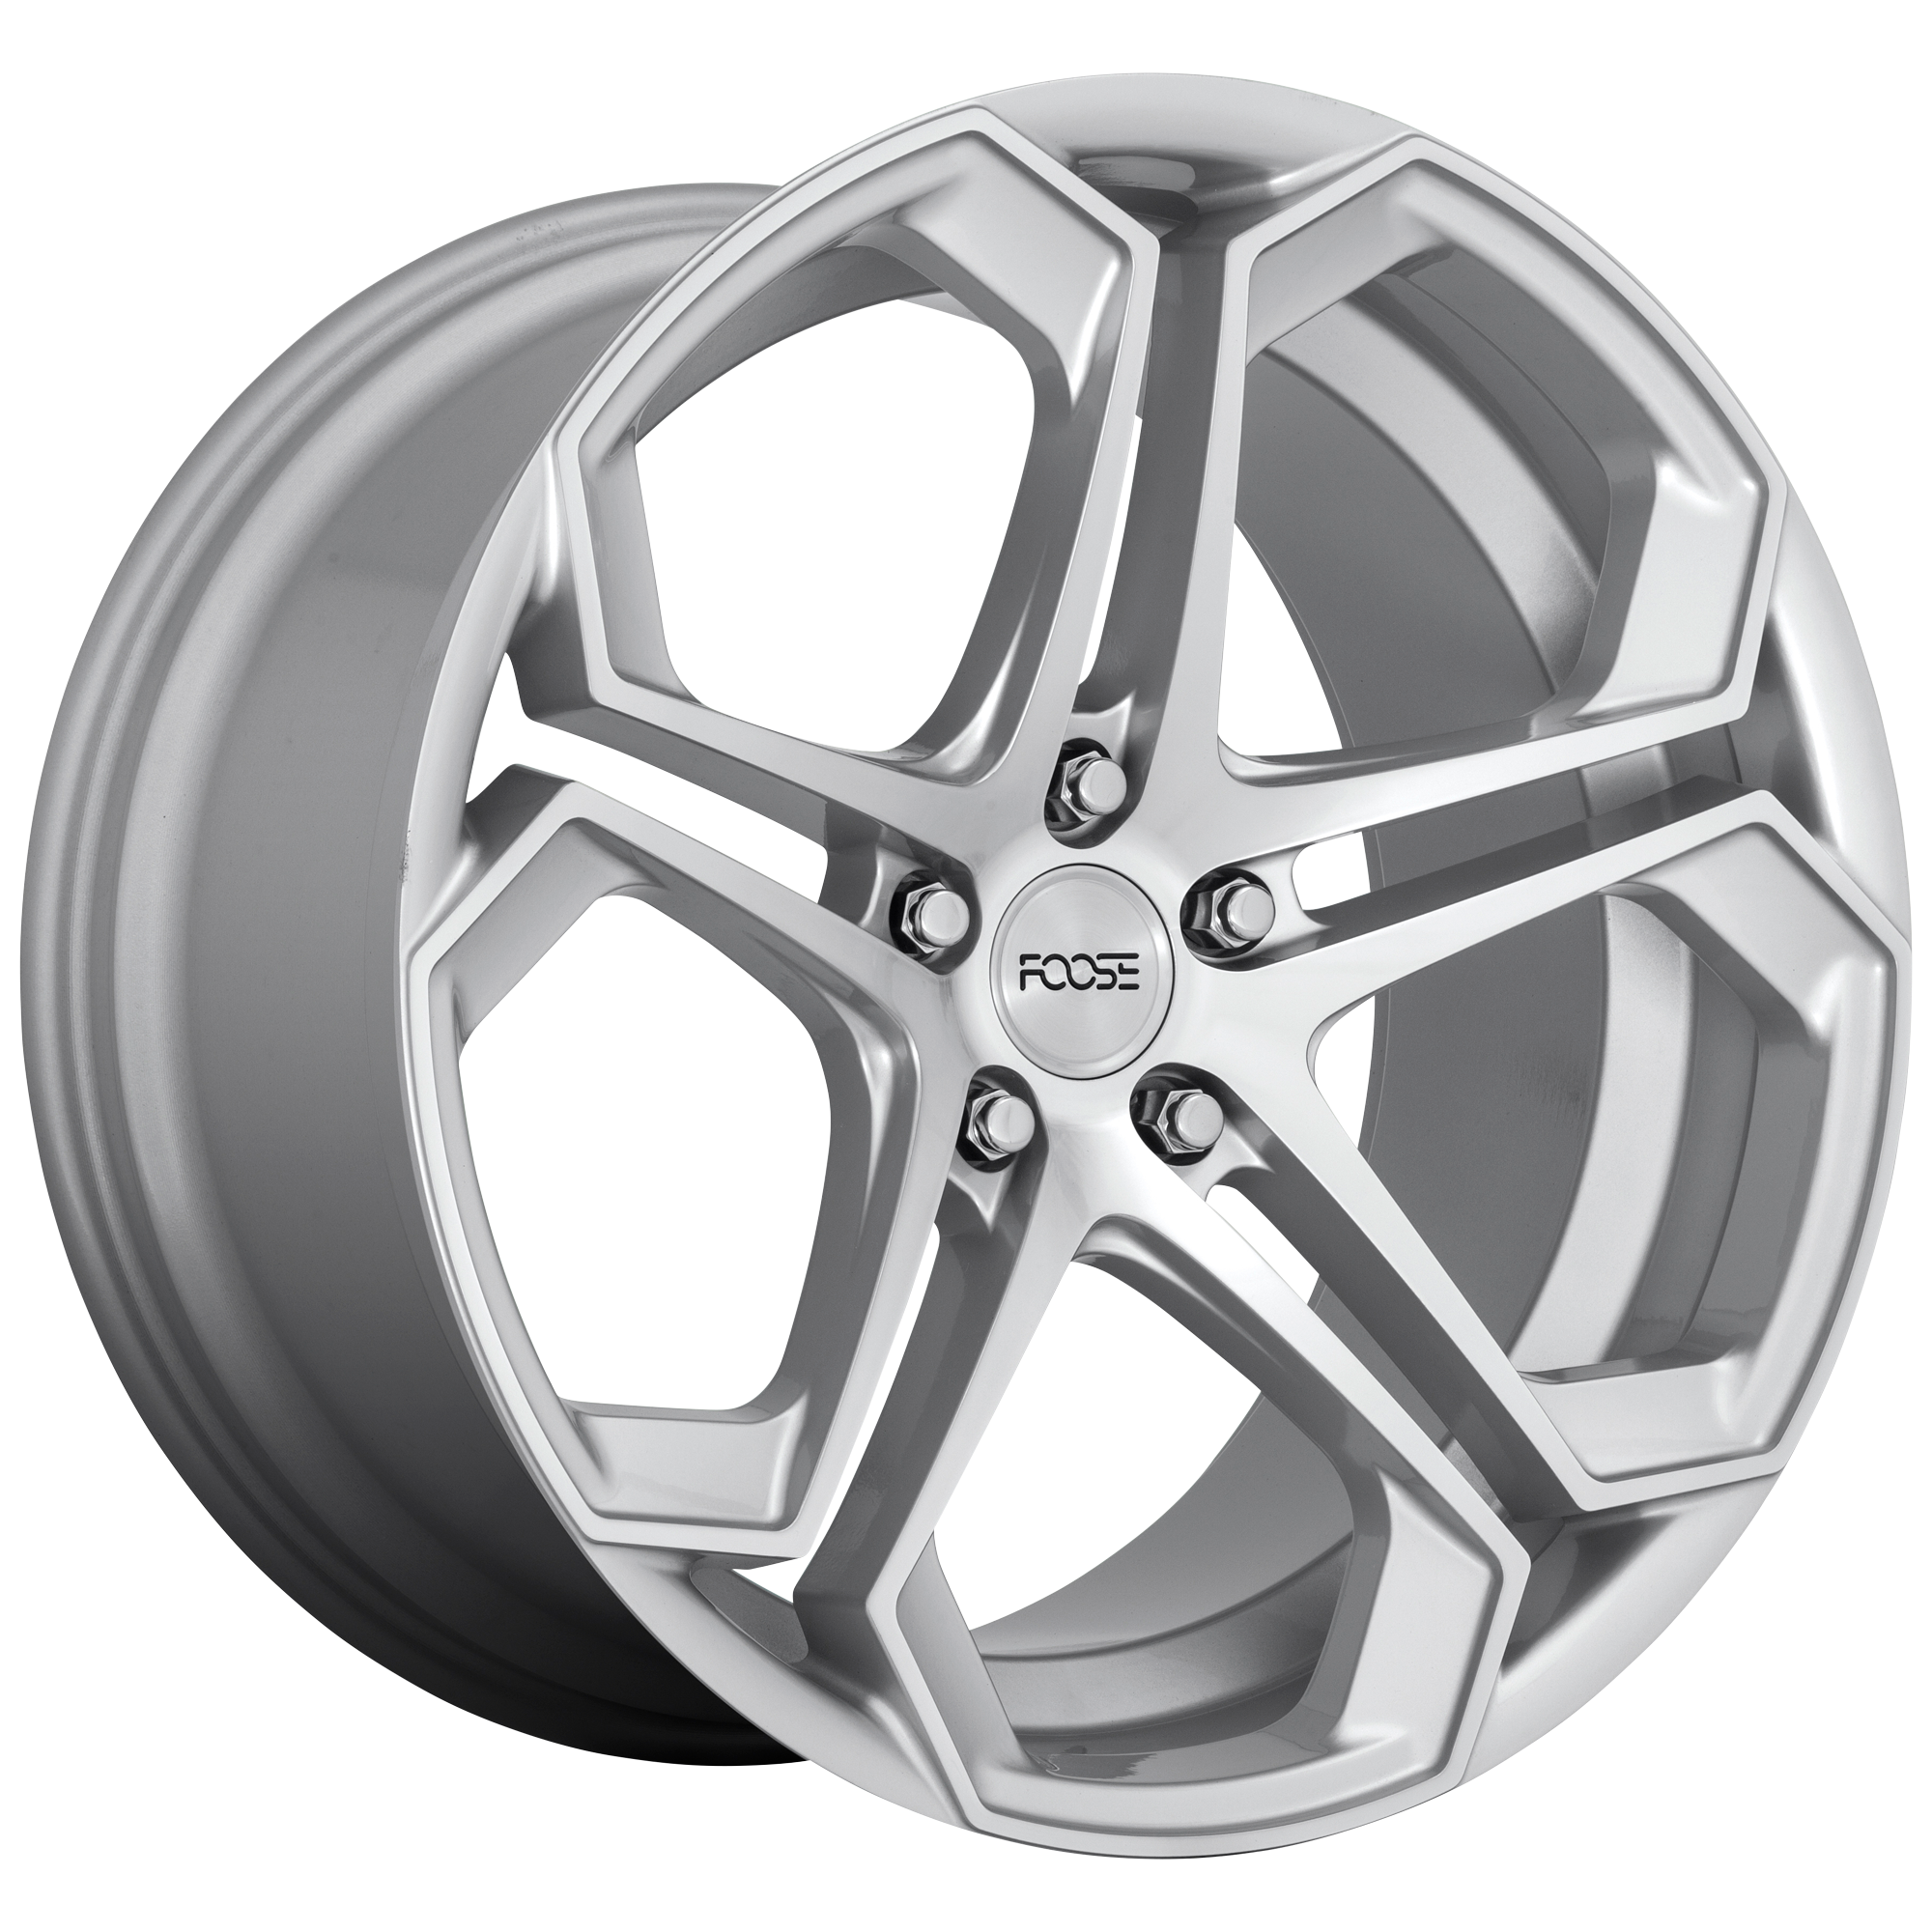 IMPALA 20x9 5x115.00 GLOSS SILVER MACHINED (18 mm) - Tires and Engine Performance